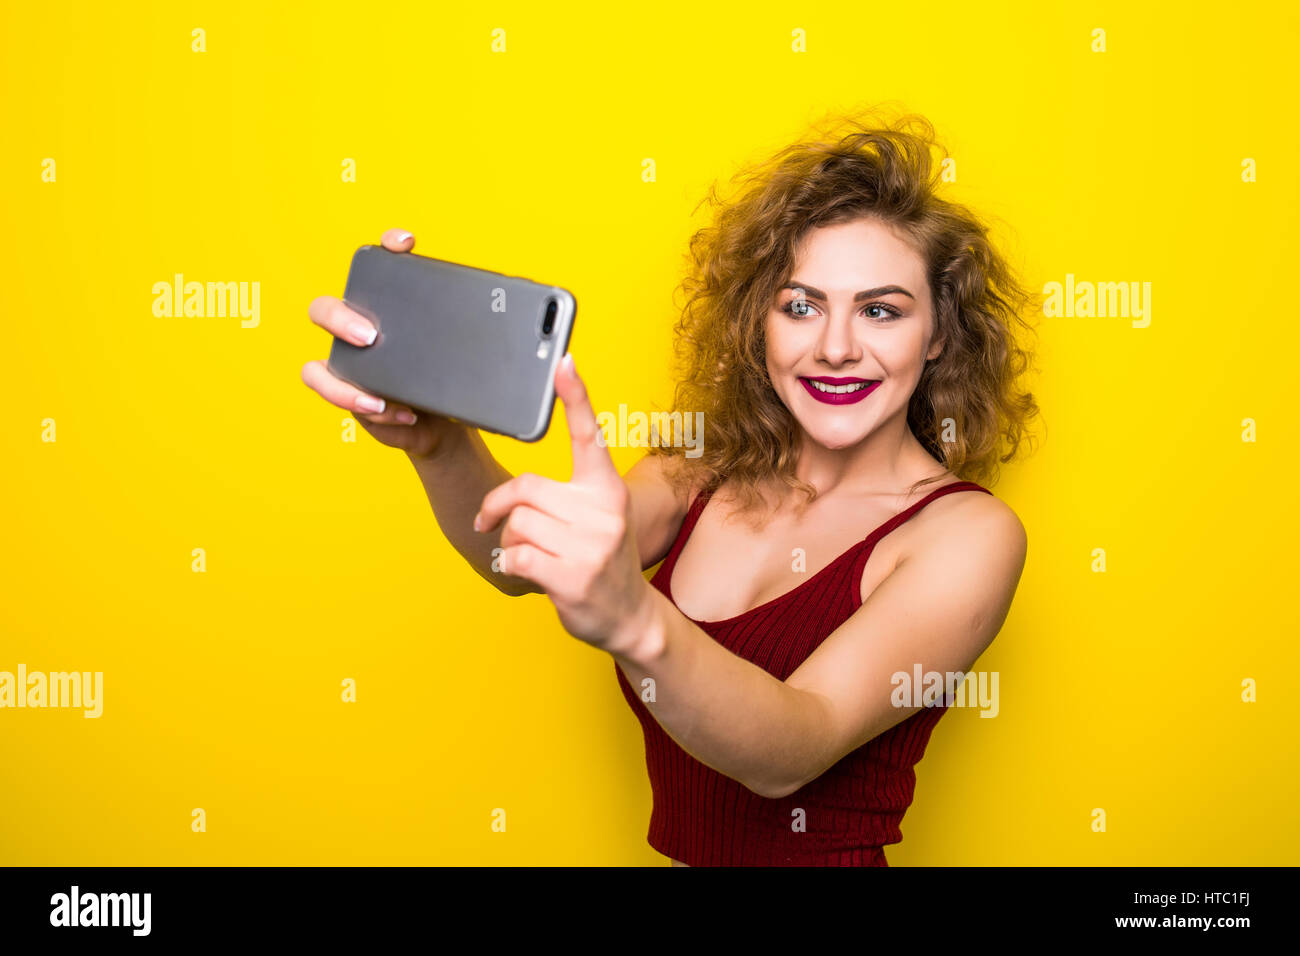 Young Beautifulgirl With An Curly Hairstyle Laughing Girl Take Selfie From Phone On Yellow